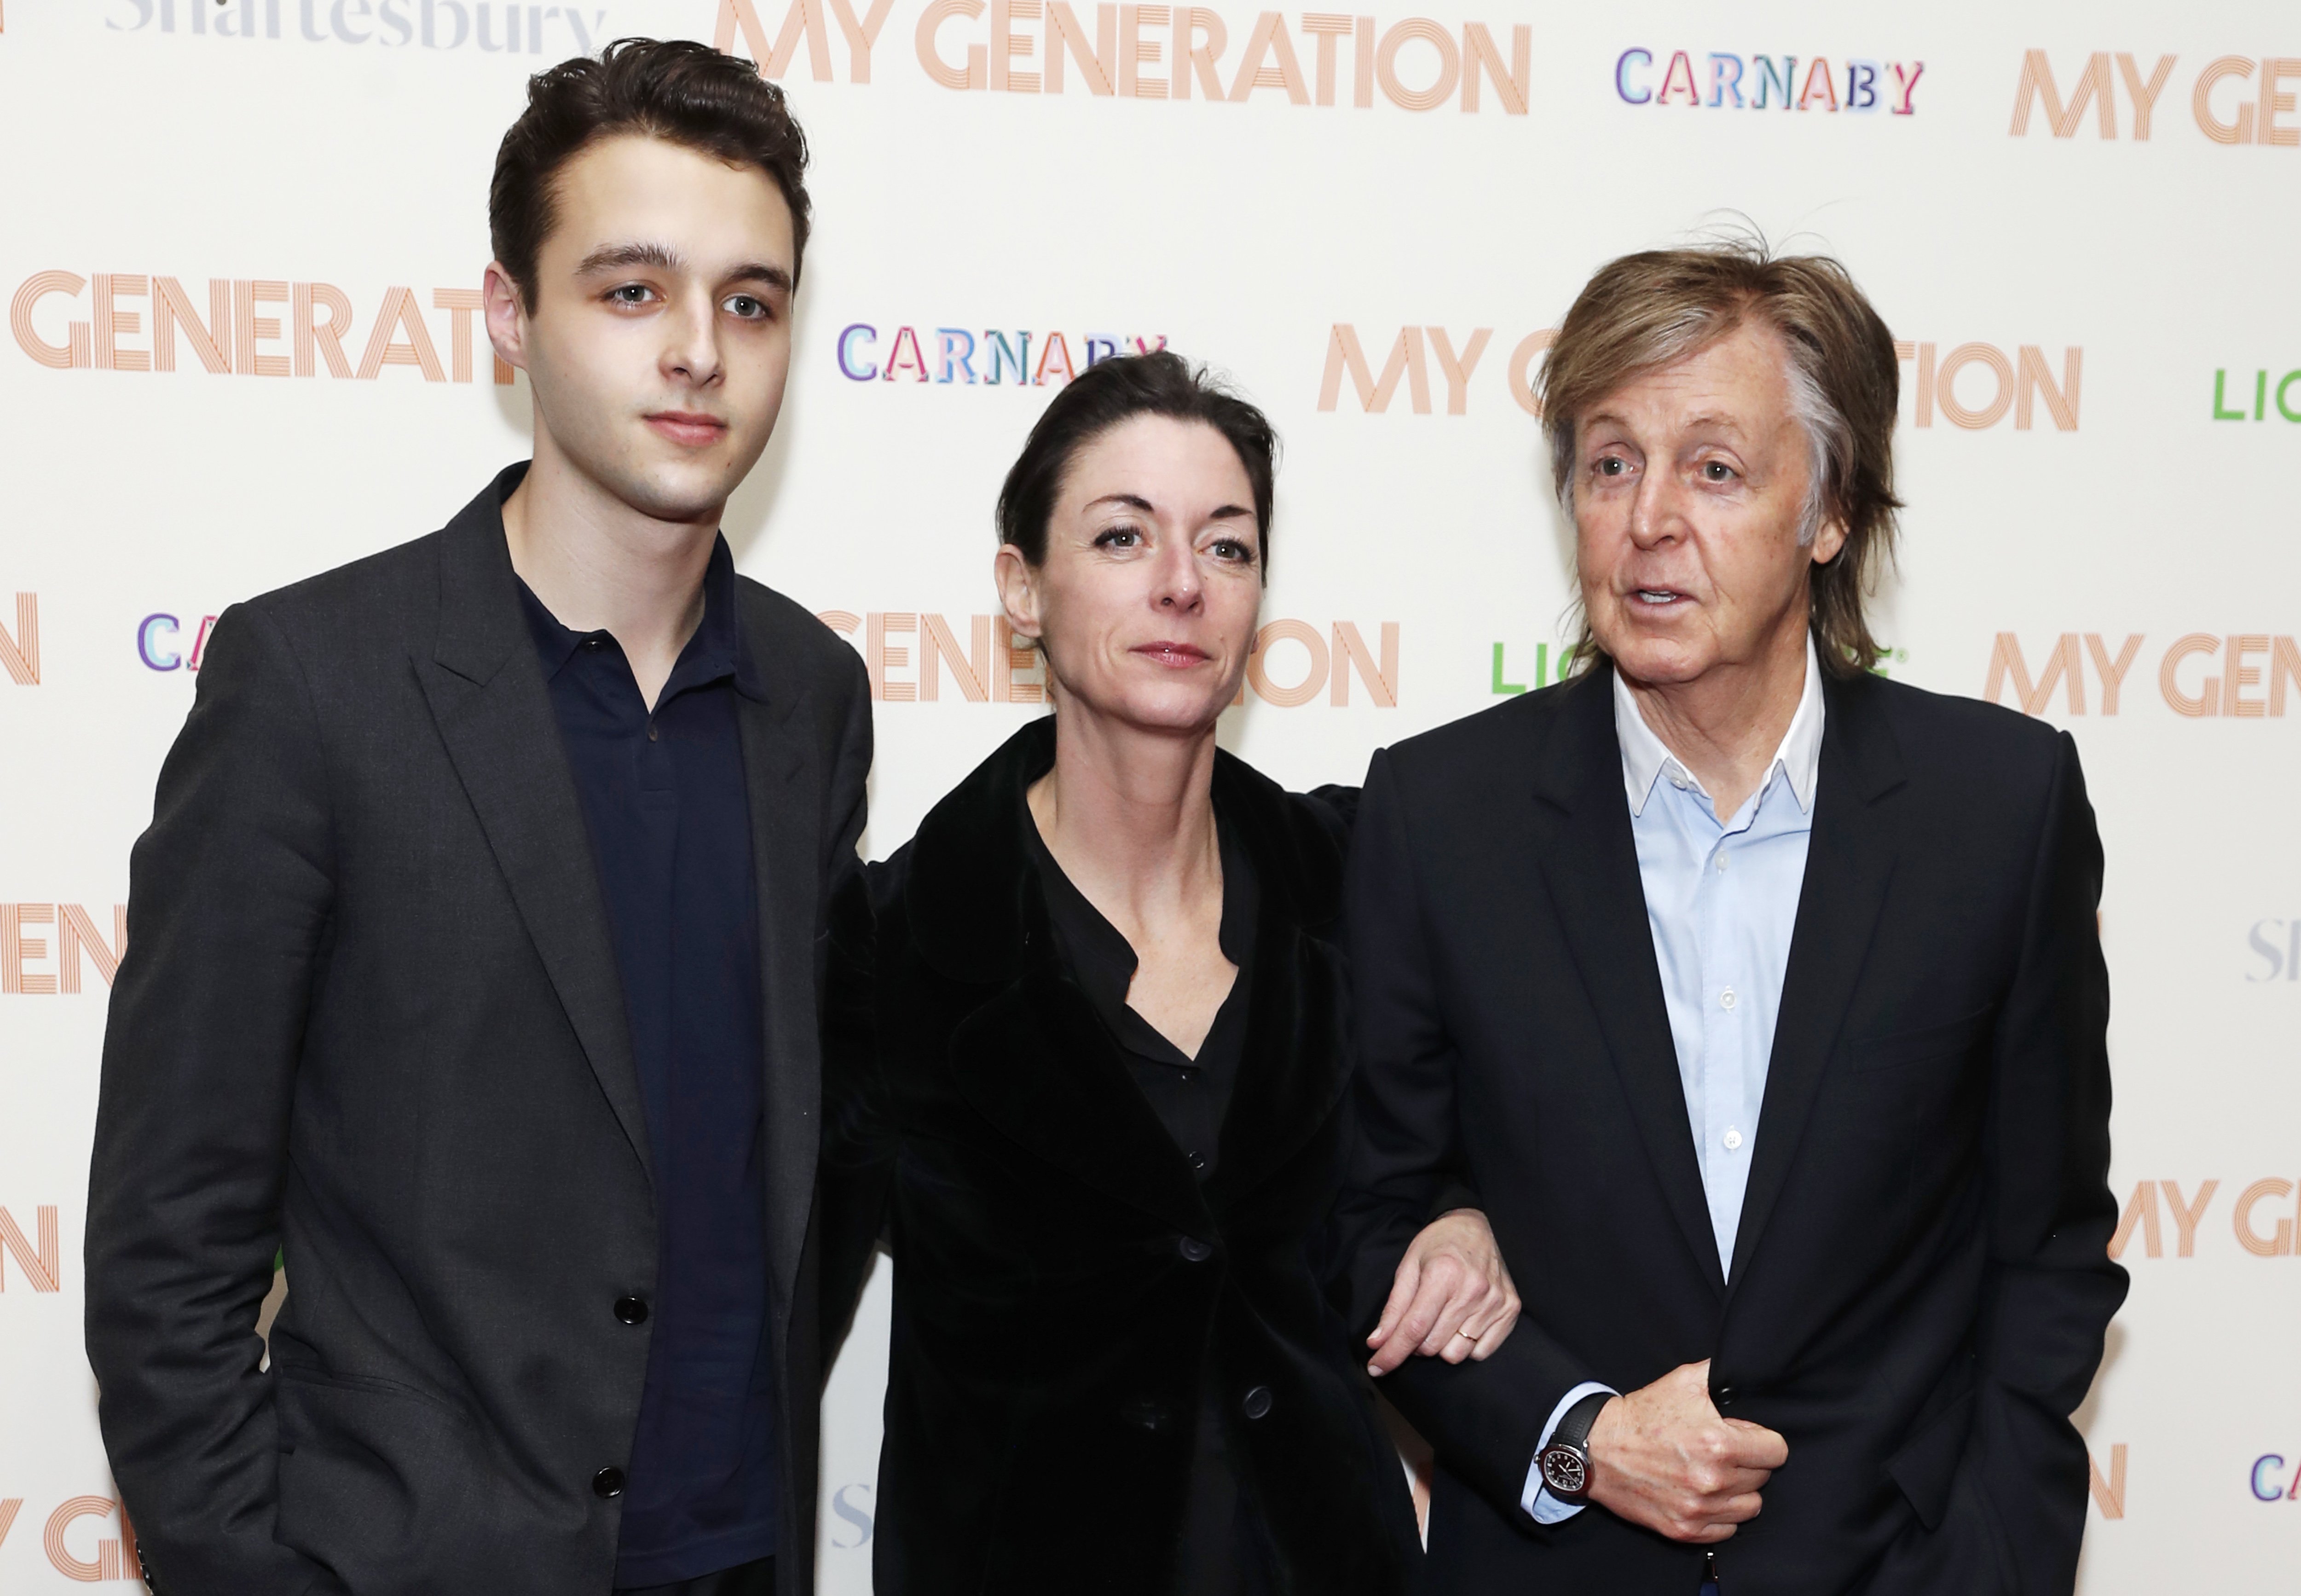 Arthur Donald, Mary McCartney and Sir Paul McCartney attend a special screening of "My Generation" at the BFI Southbank on March 14, 2018 in London, England on March 14, 2018 | Source: Getty Images 